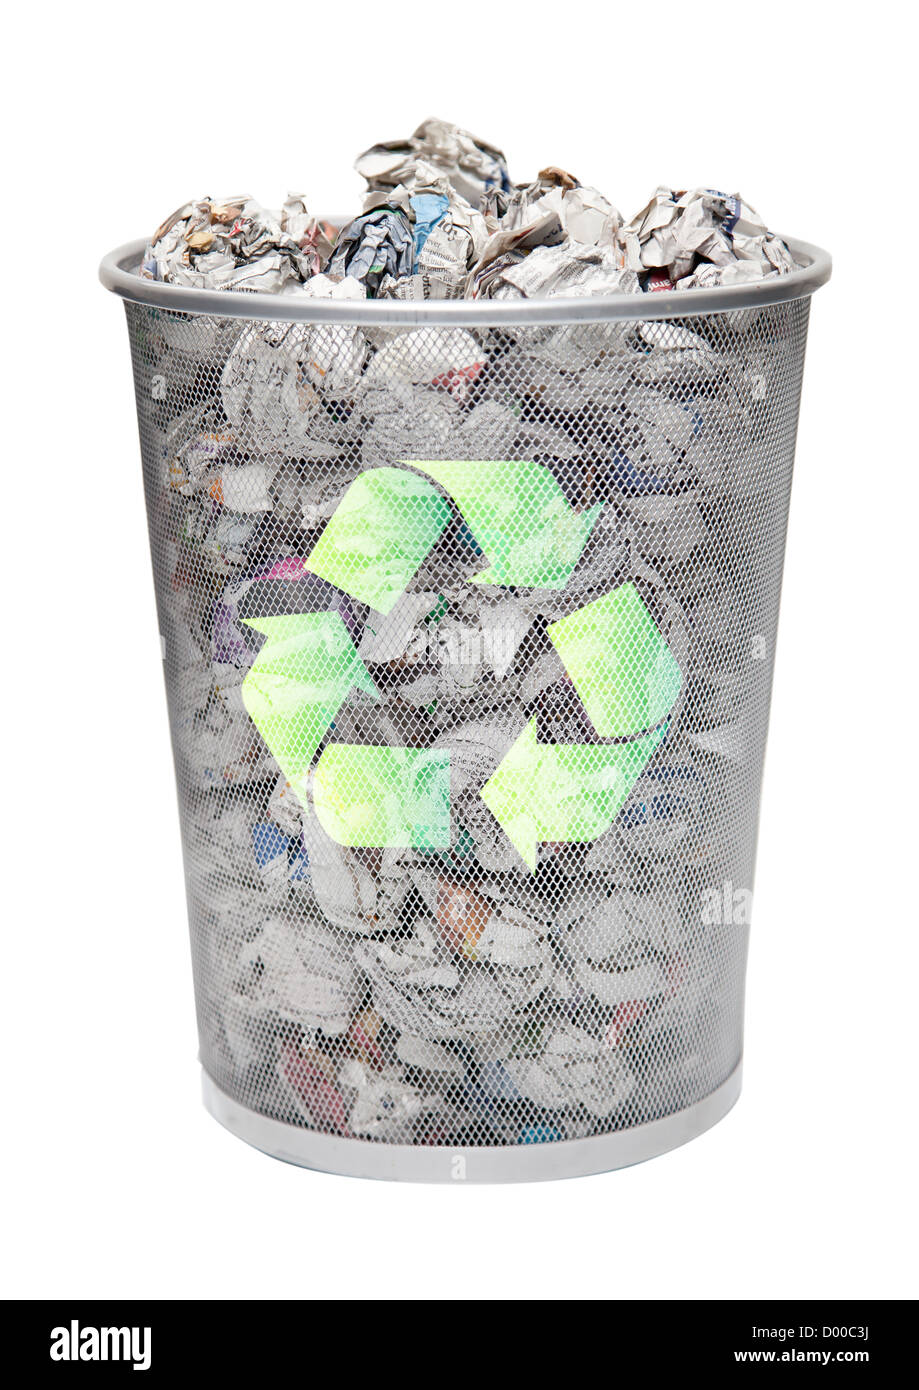 Recycling bin full of crumpled papers over white background Stock Photo